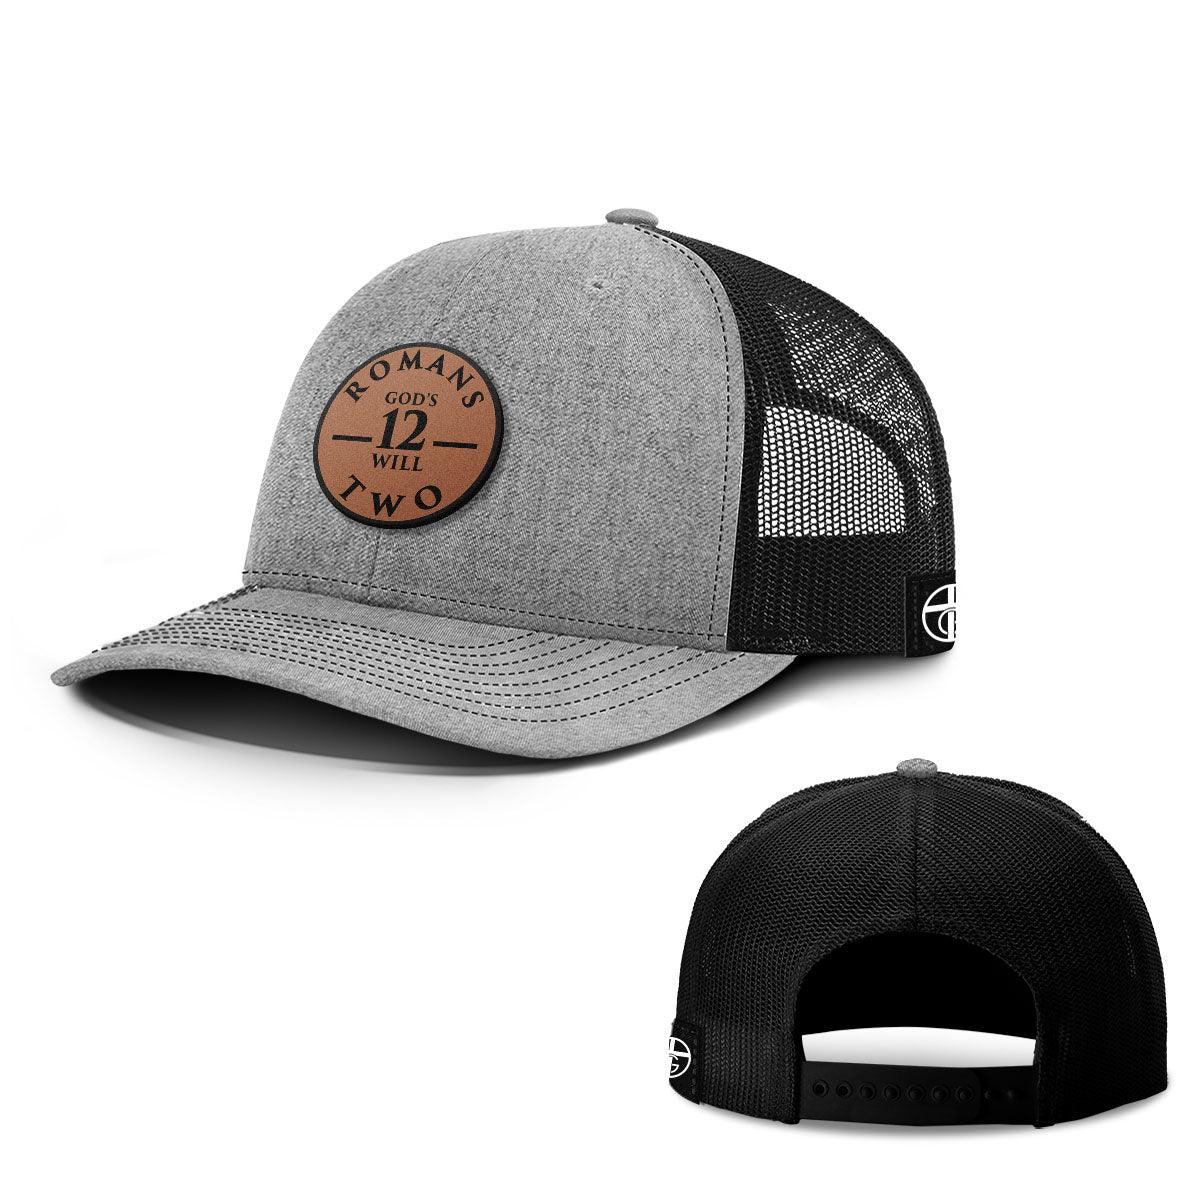 Romans 12 Two Leather Patch Hats - Our True God